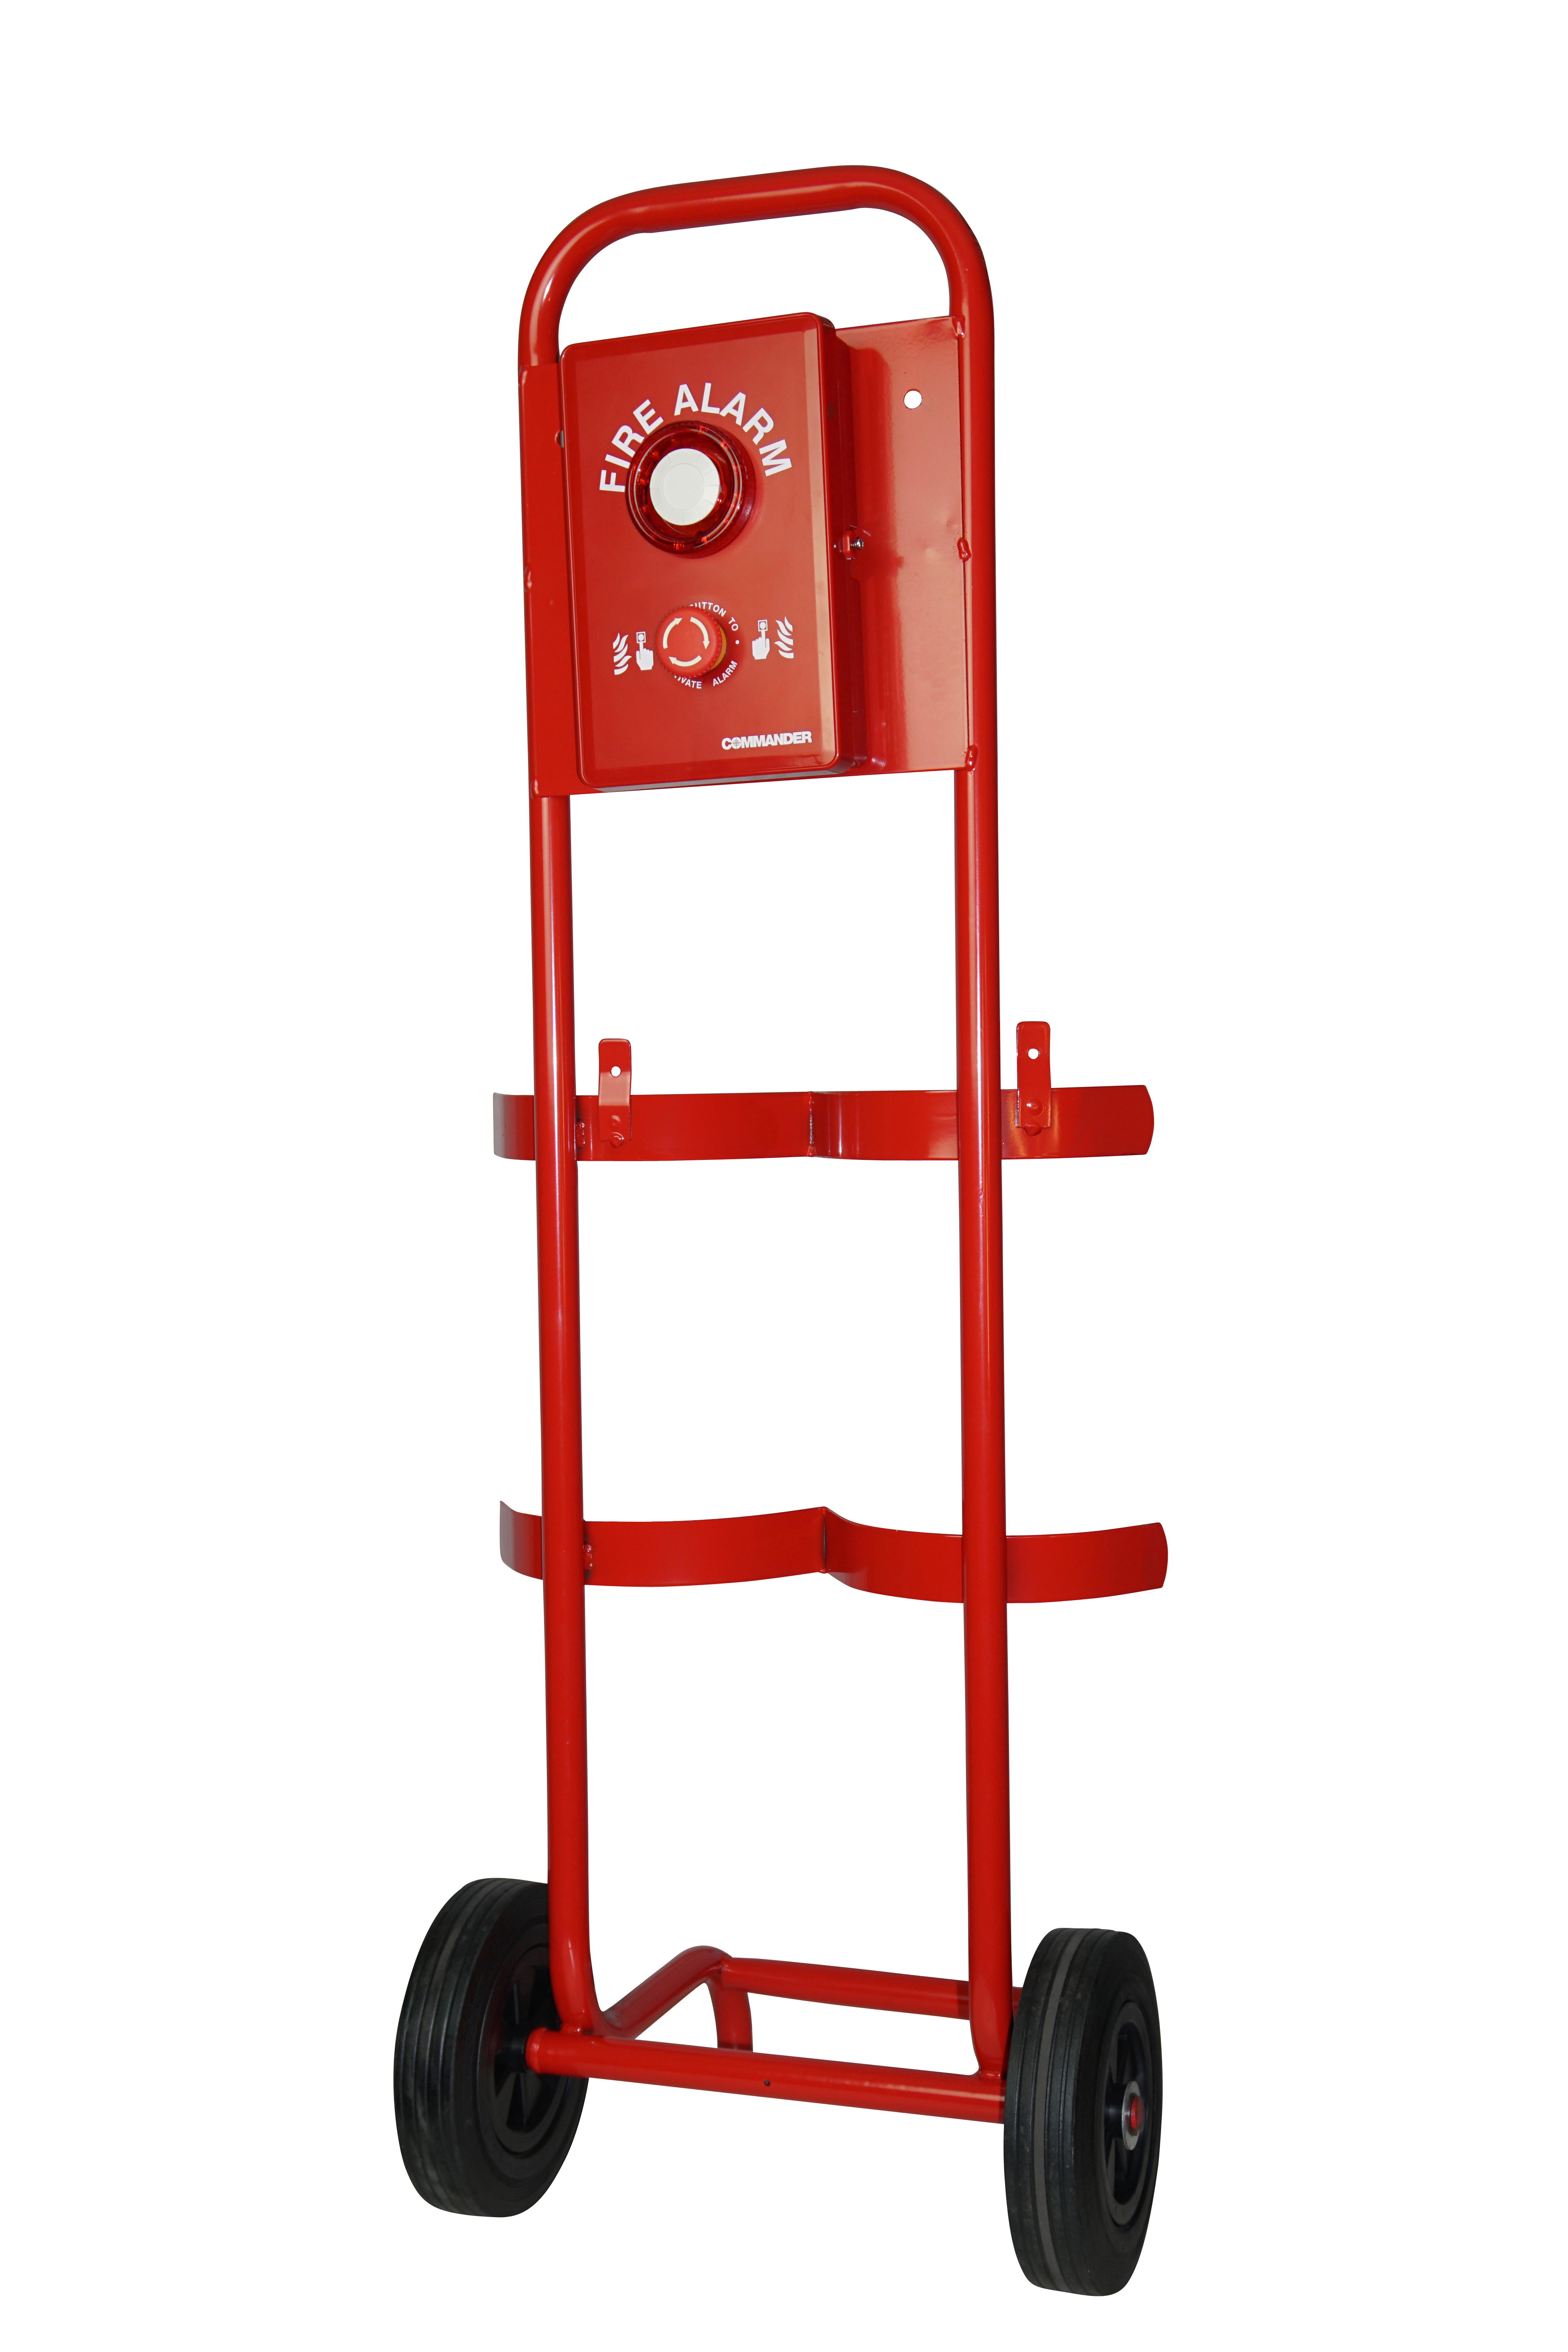 Double Fire Extinguisher Trolley with Battery Operated Evacuation Alarm